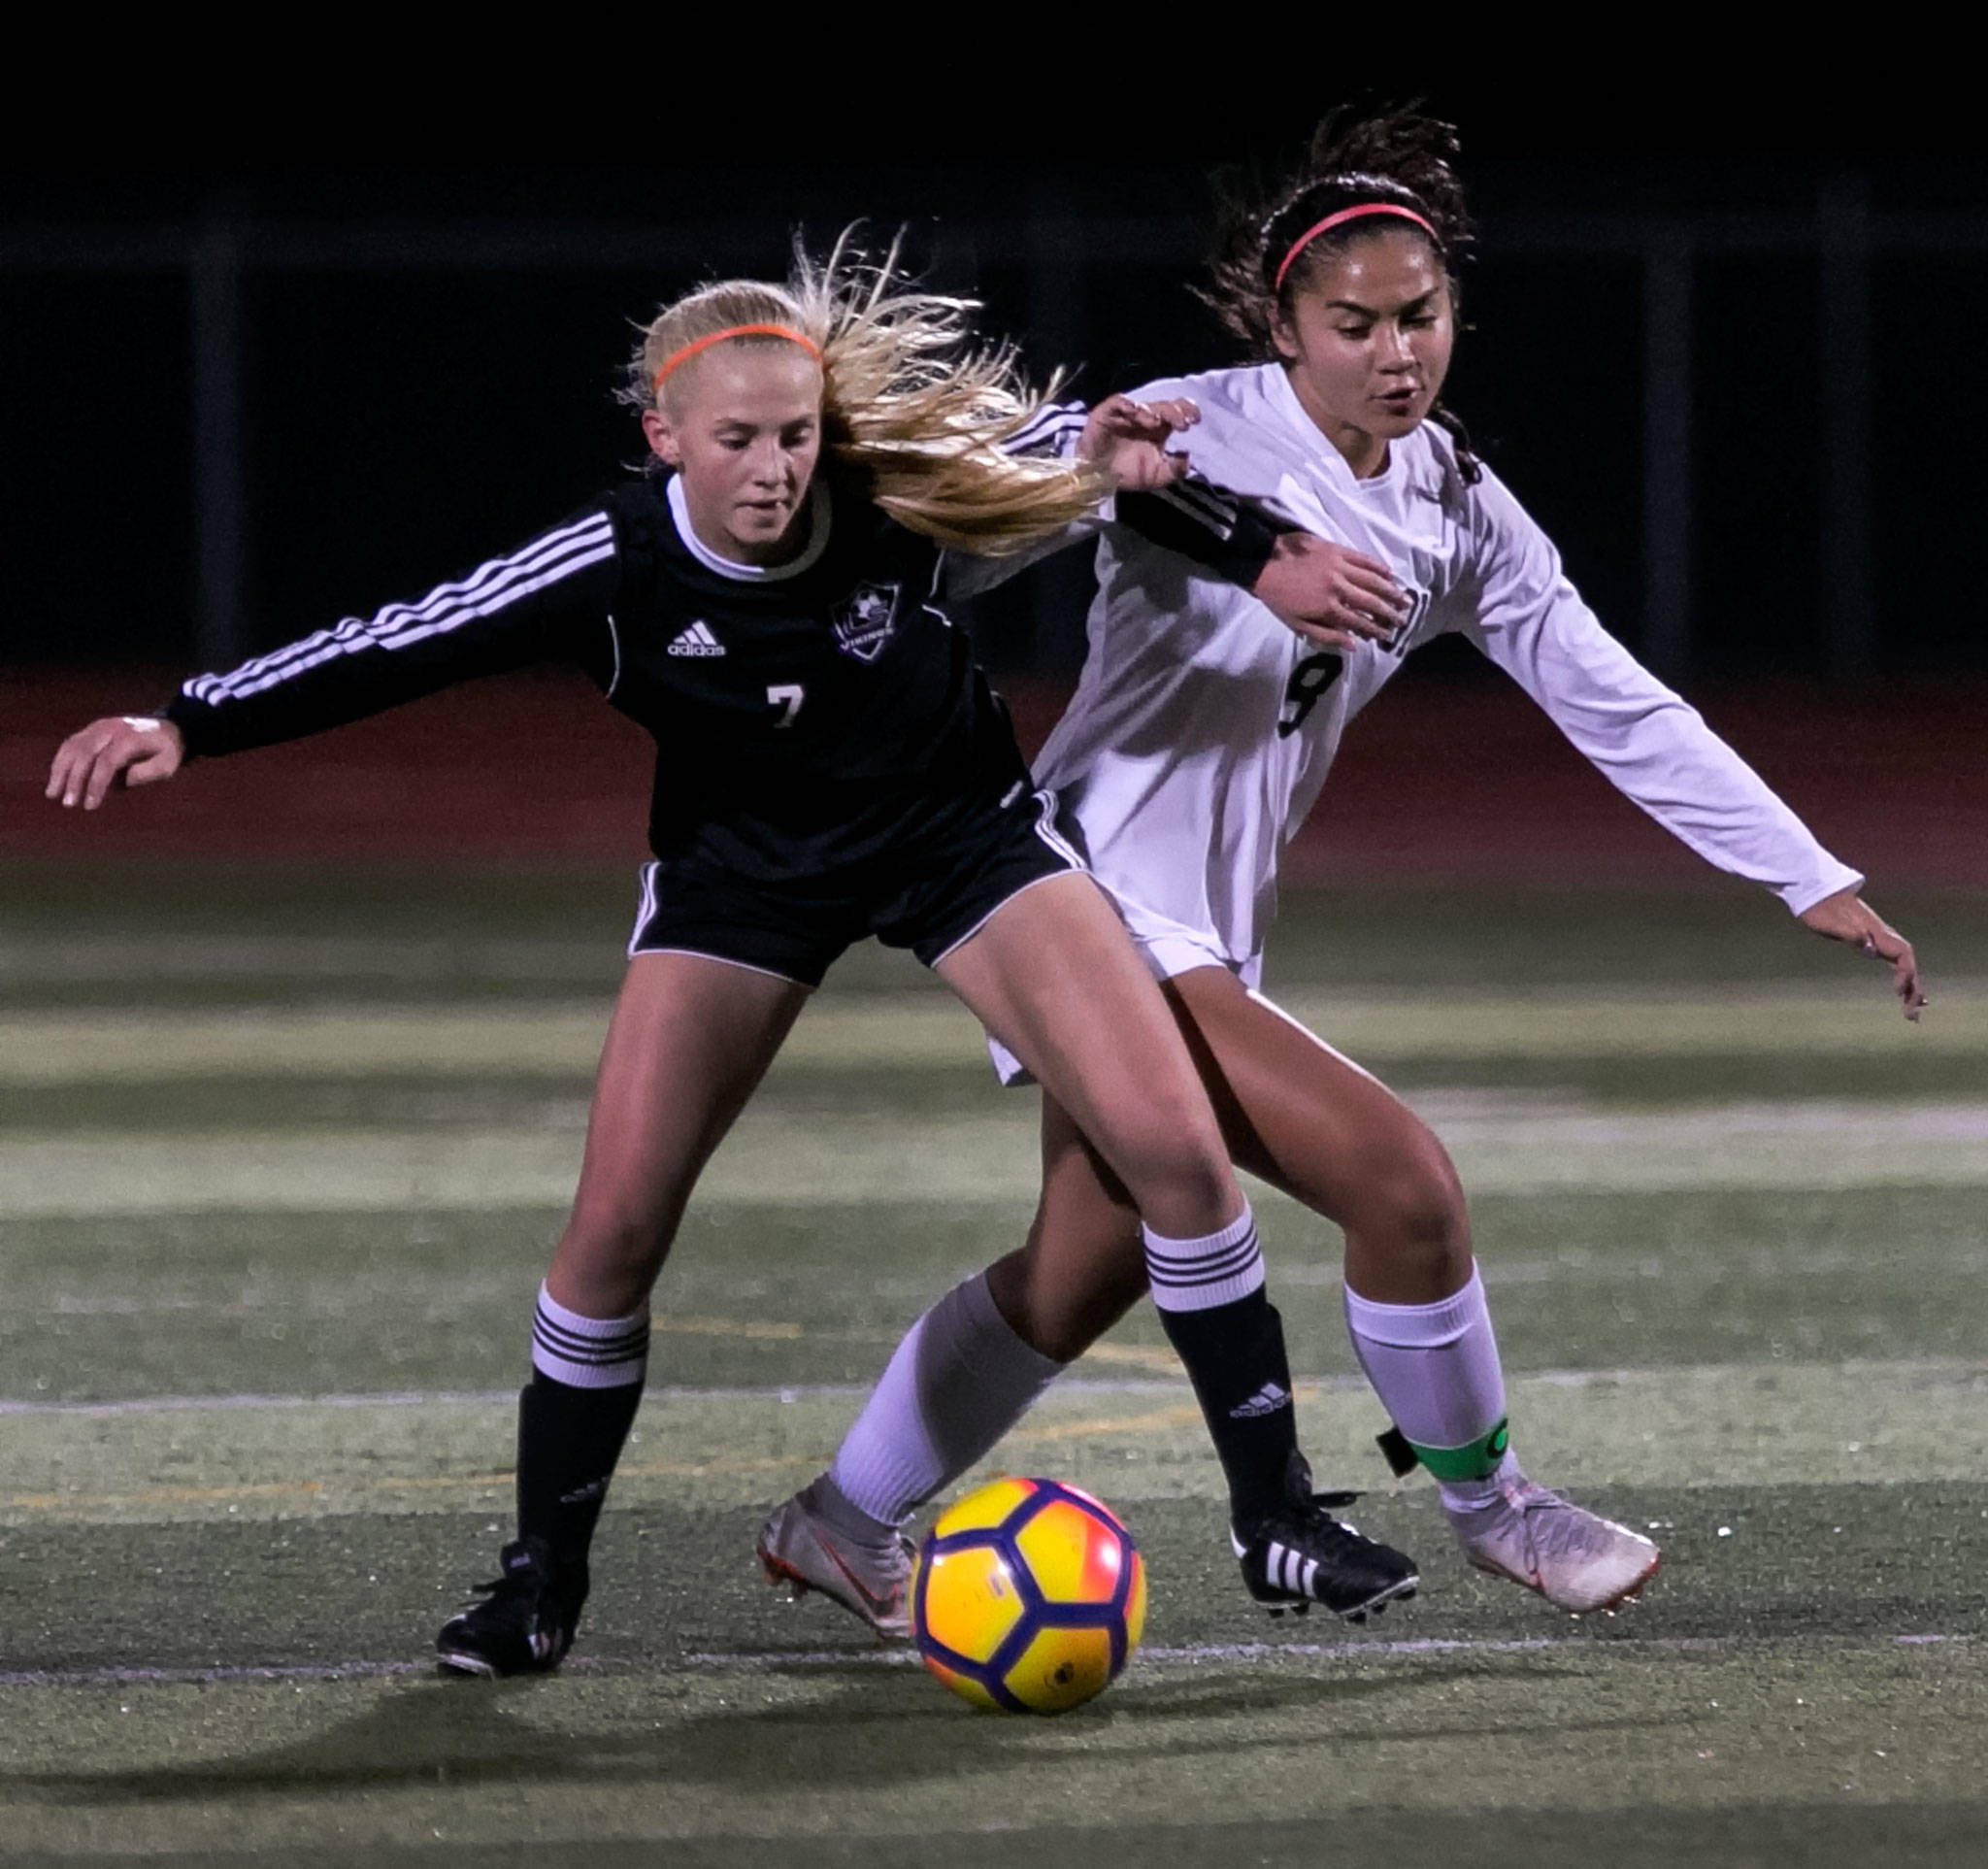 Lake Stevens’ Callaway Knutson (left) shields her dribble from Jackson’s Peyton Manalo during the first half of a Wesco 4A girls soccer match on Oct. 2, 2018, at Lake Stevens High School. The game ended in a scoreless draw after two periods of extra time. (Kevin Clark / The Herald)